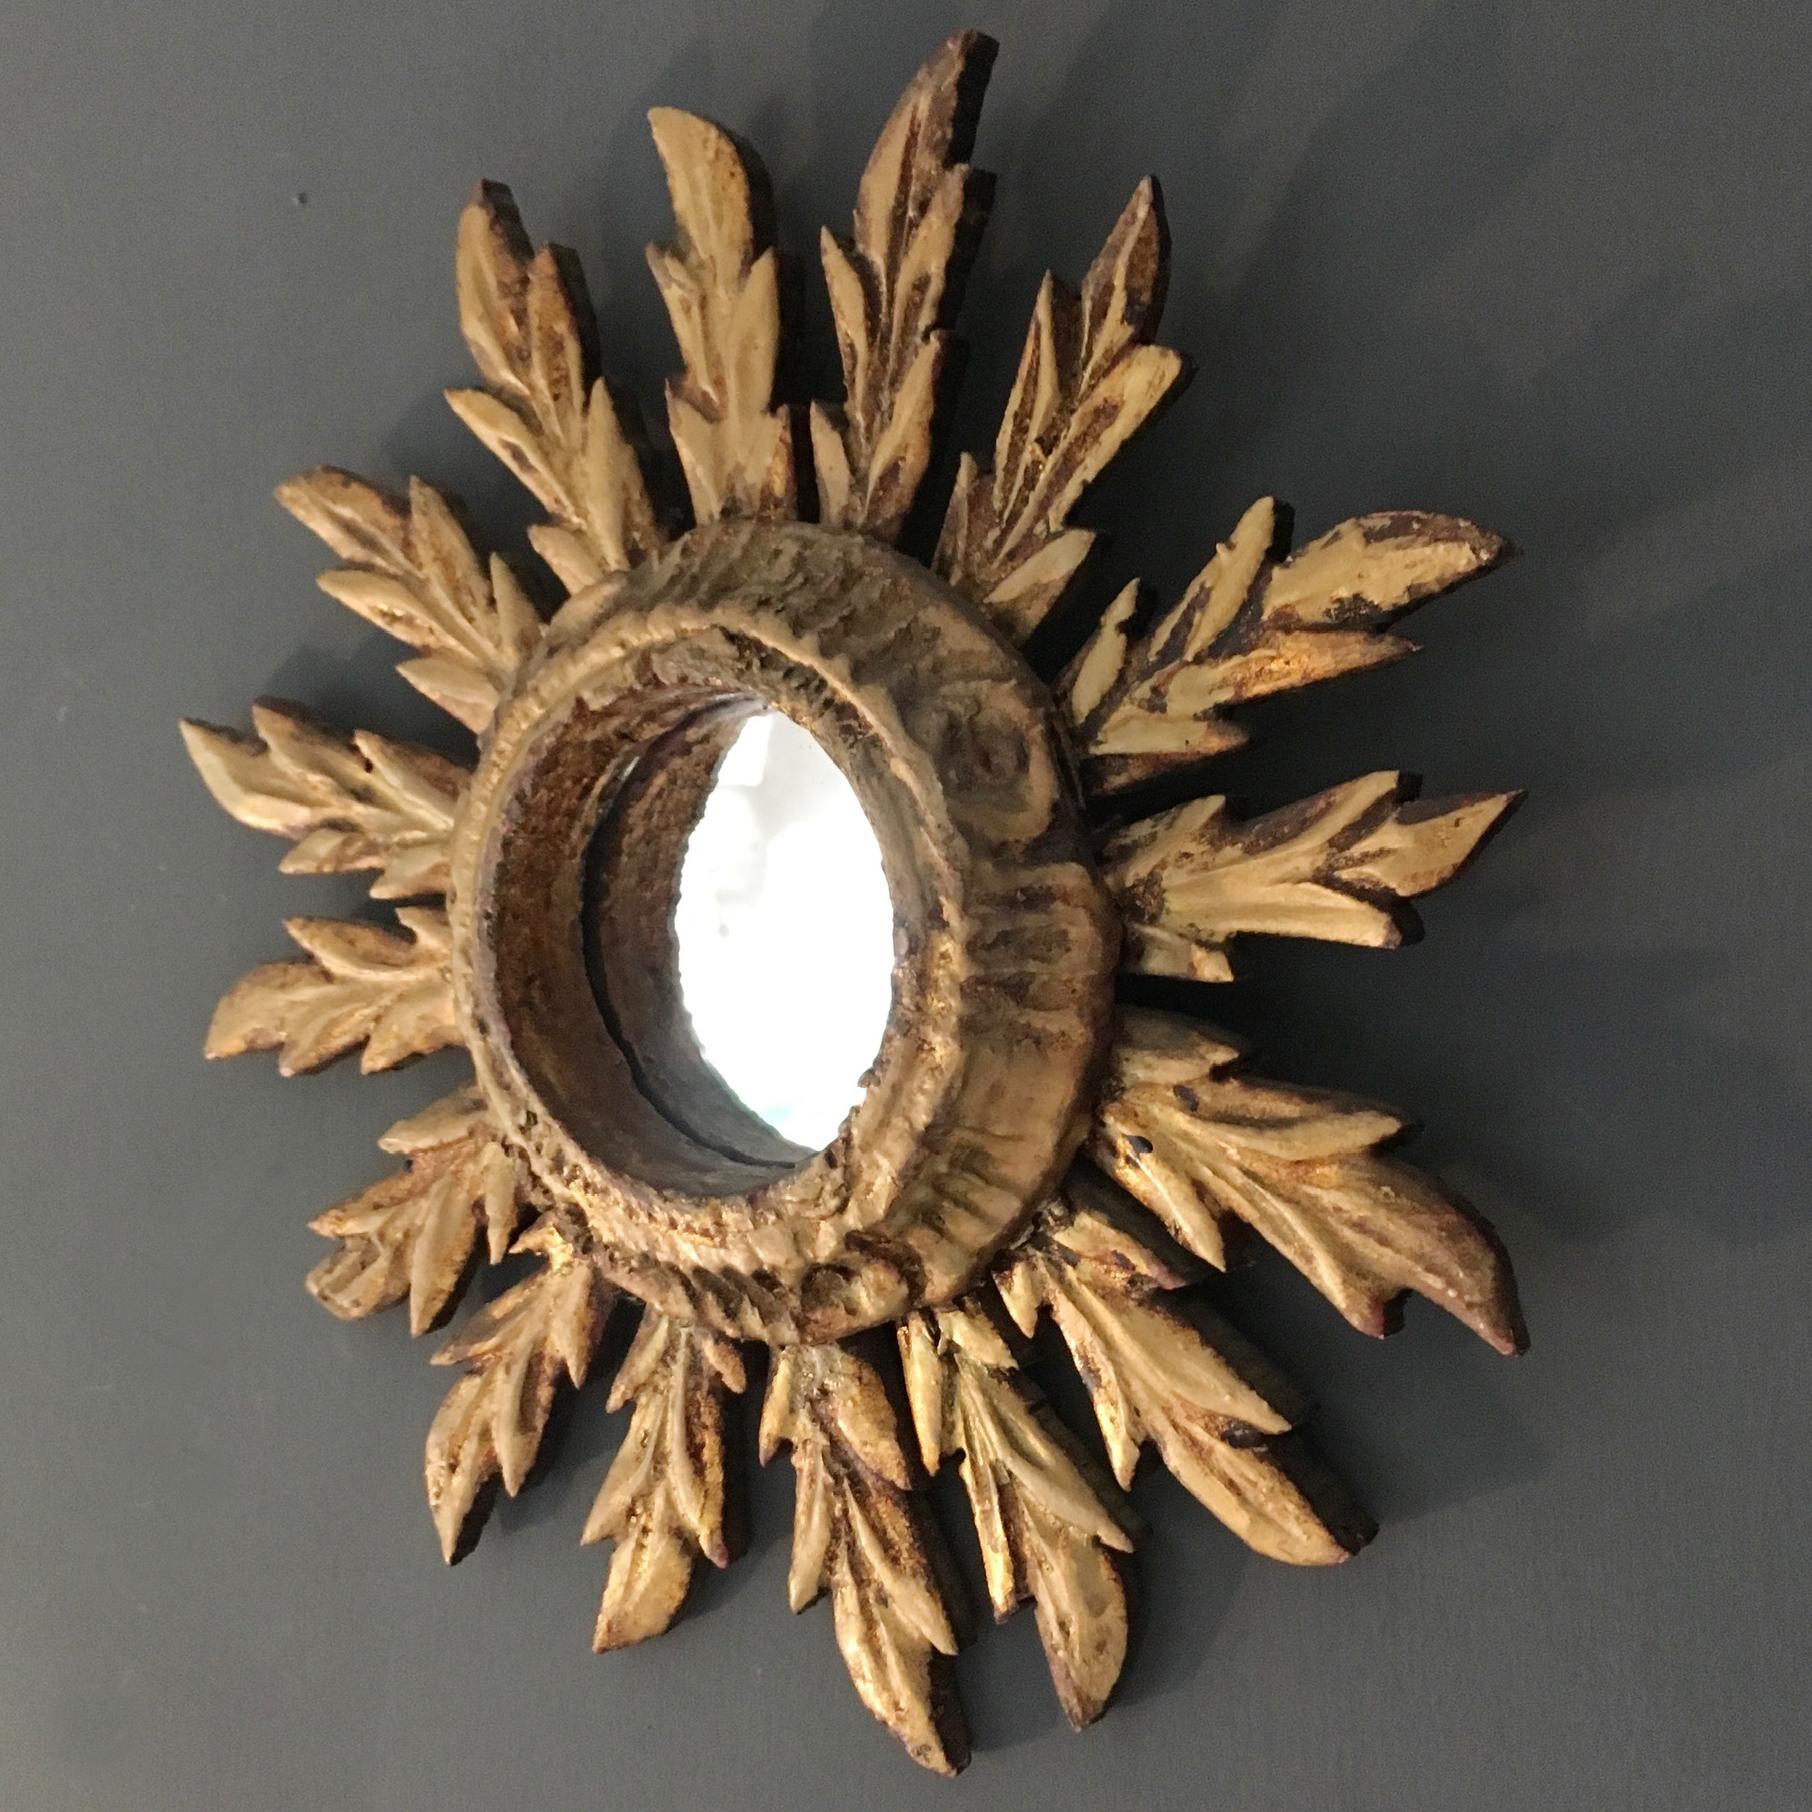 Hand-Crafted Small Spanish Handcrafted Wooden Sunburst Mirror